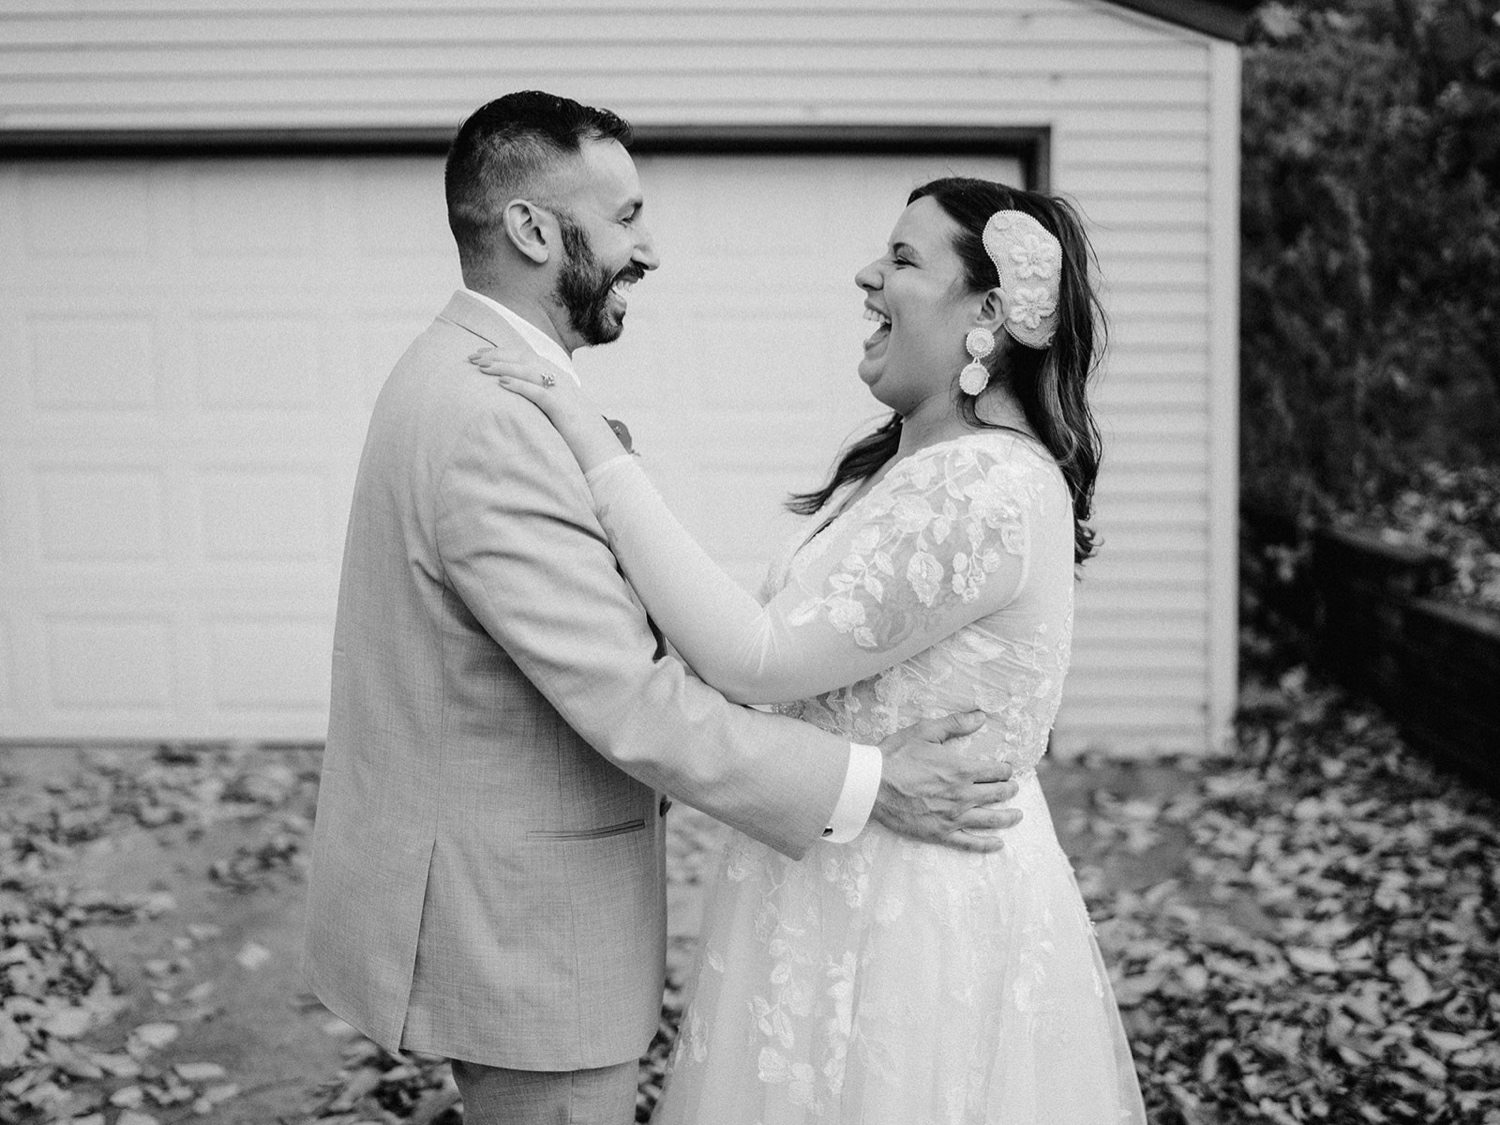 Photos of a bride and groom doing their first dance in their front yard. Fall leaves all over the ground.